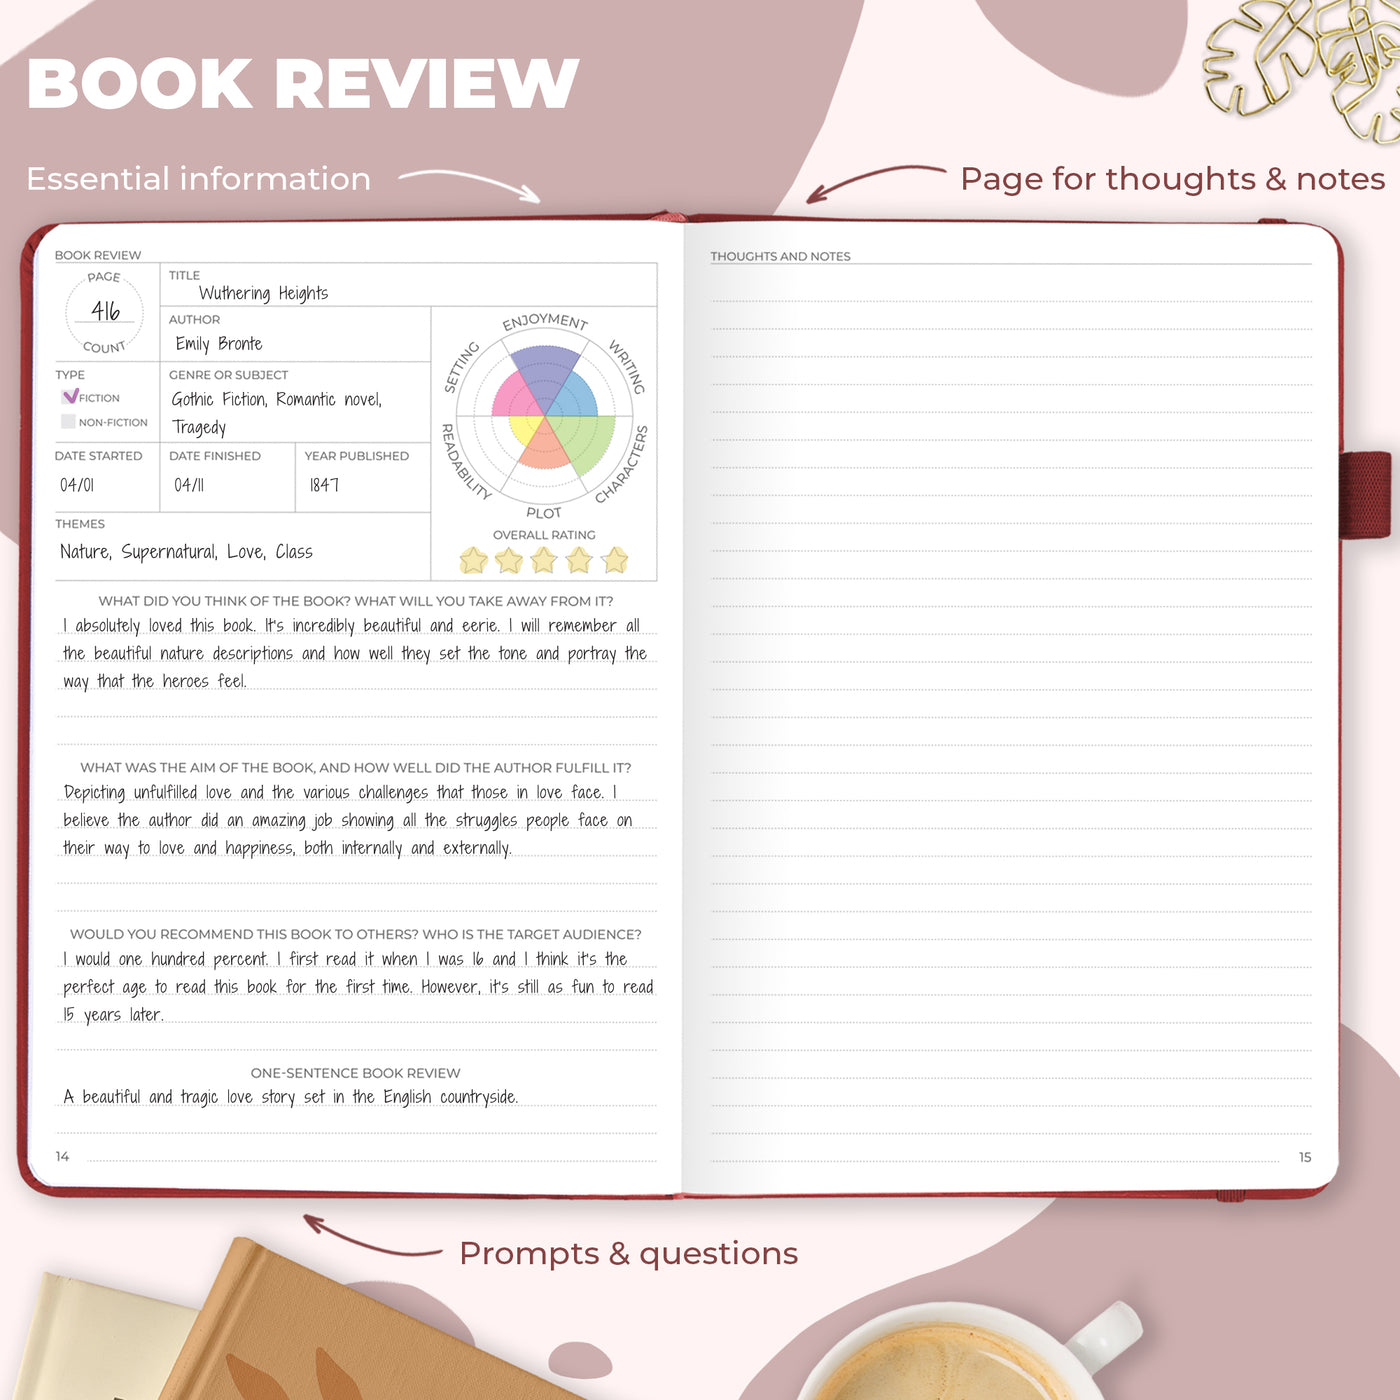 Reading Journal Template  Reading journal, Book review template